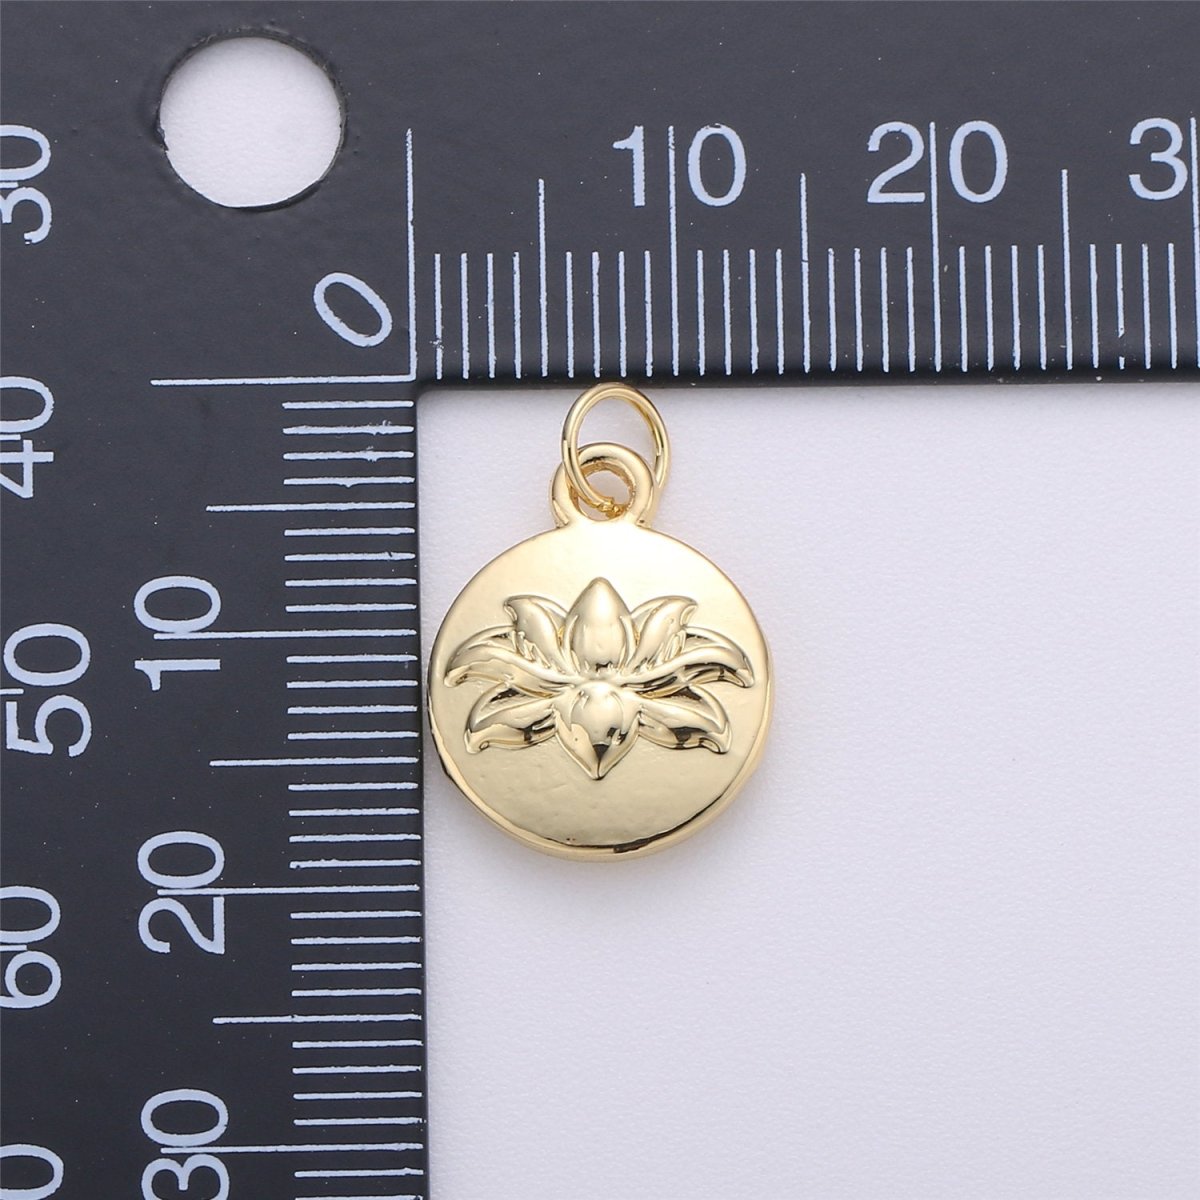 18k Gold Filled Lotus Charm, Gold Lotus Pendant, Dainty Lotus Charm, Gold Lotus Charm Lotus Flower Disc Coin Charms C-299 - DLUXCA